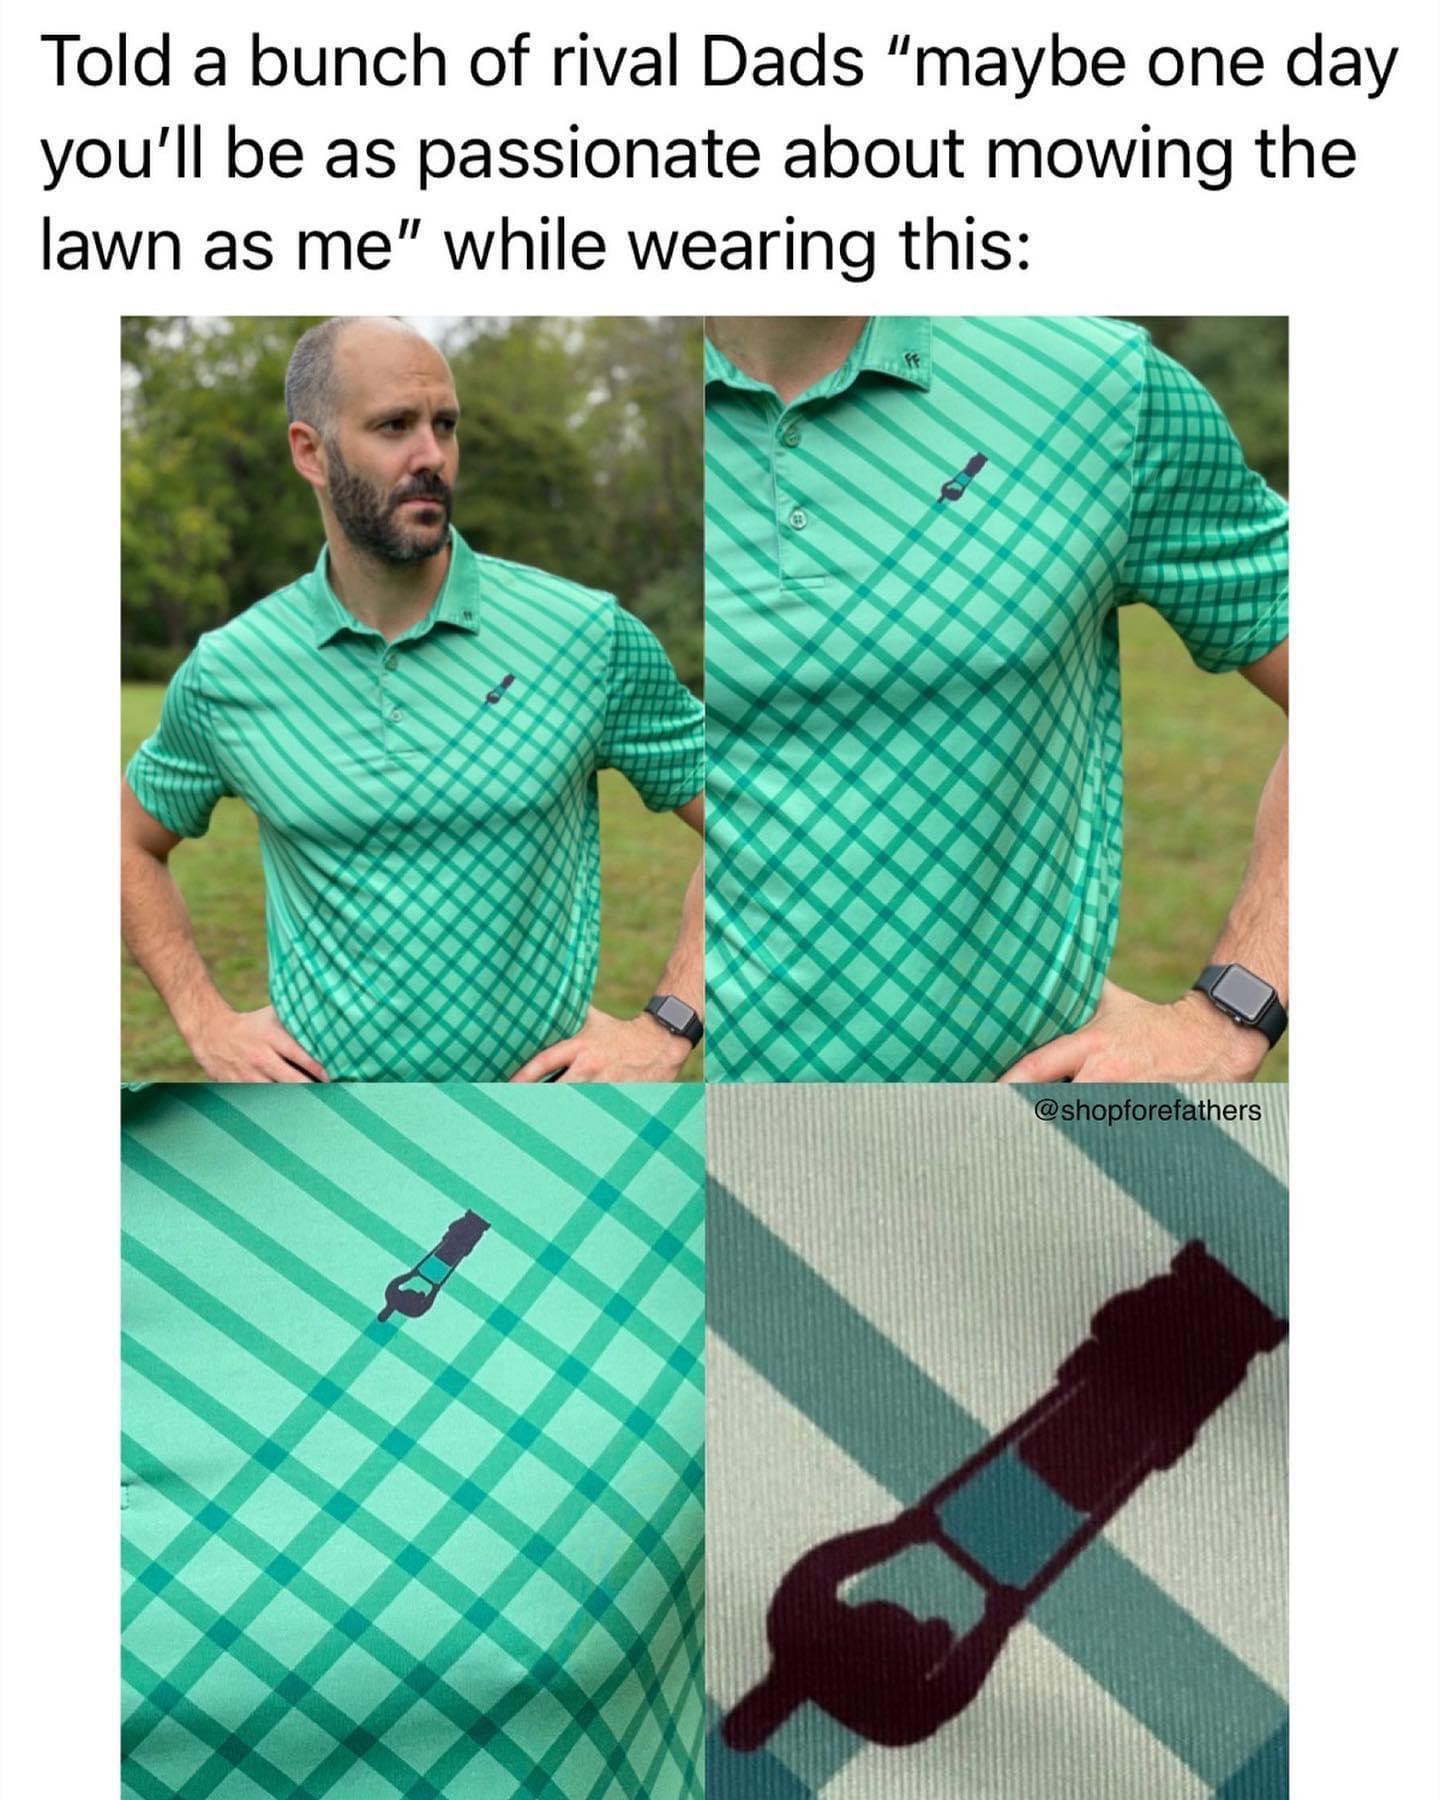 daily dose of randoms - lawn mower stripe shirt - Told a bunch of rival Dads "maybe one day you'll be as passionate about mowing the lawn as me" while wearing this